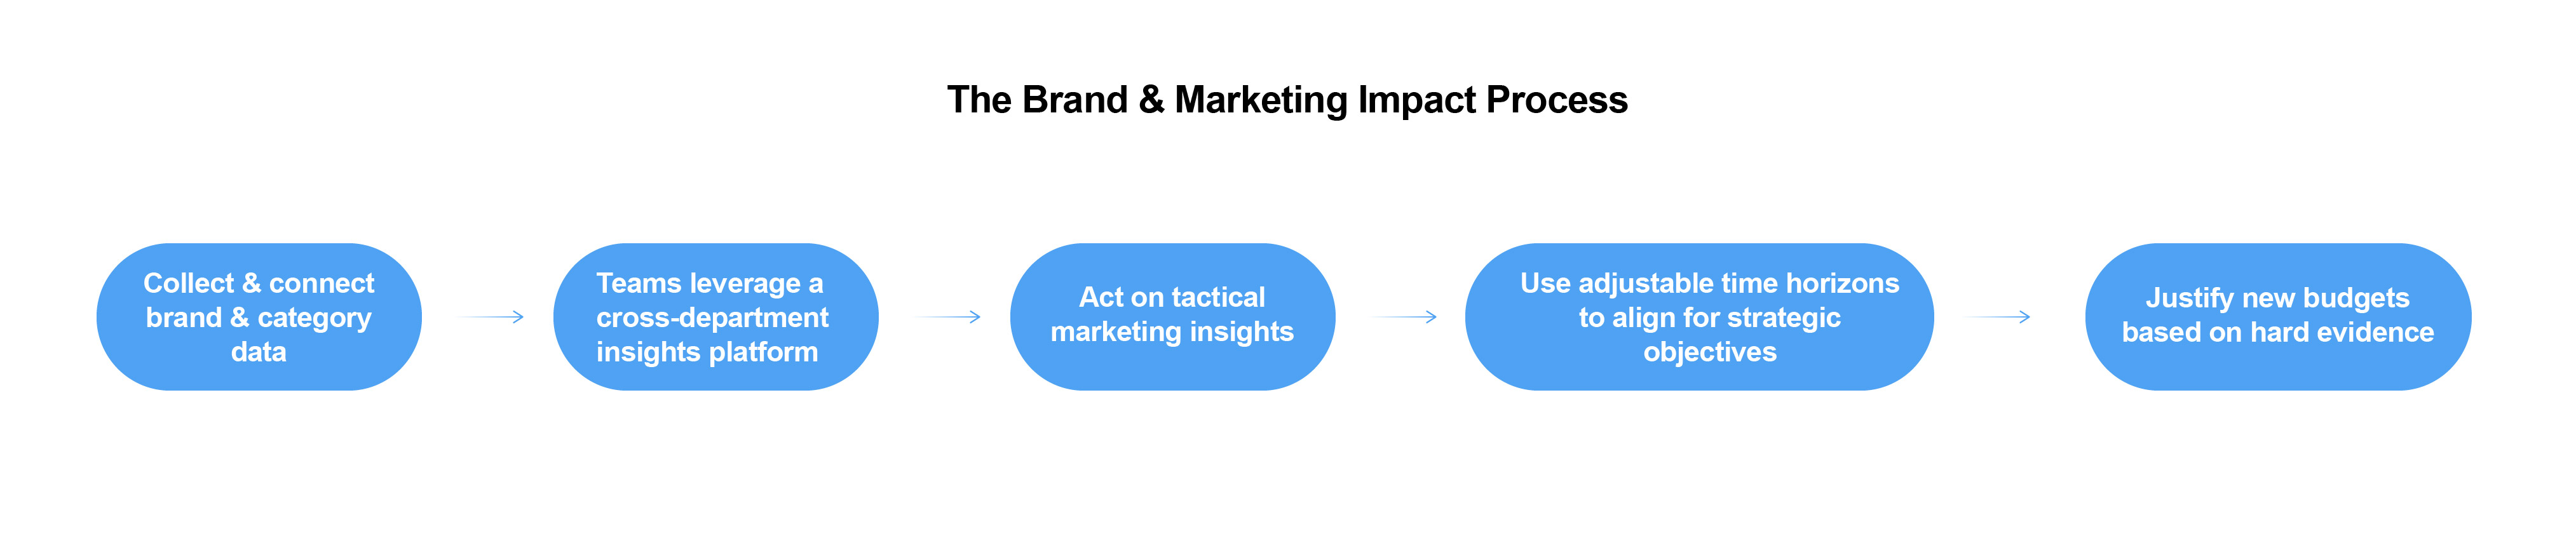 The Brand and Marketing Impact Process